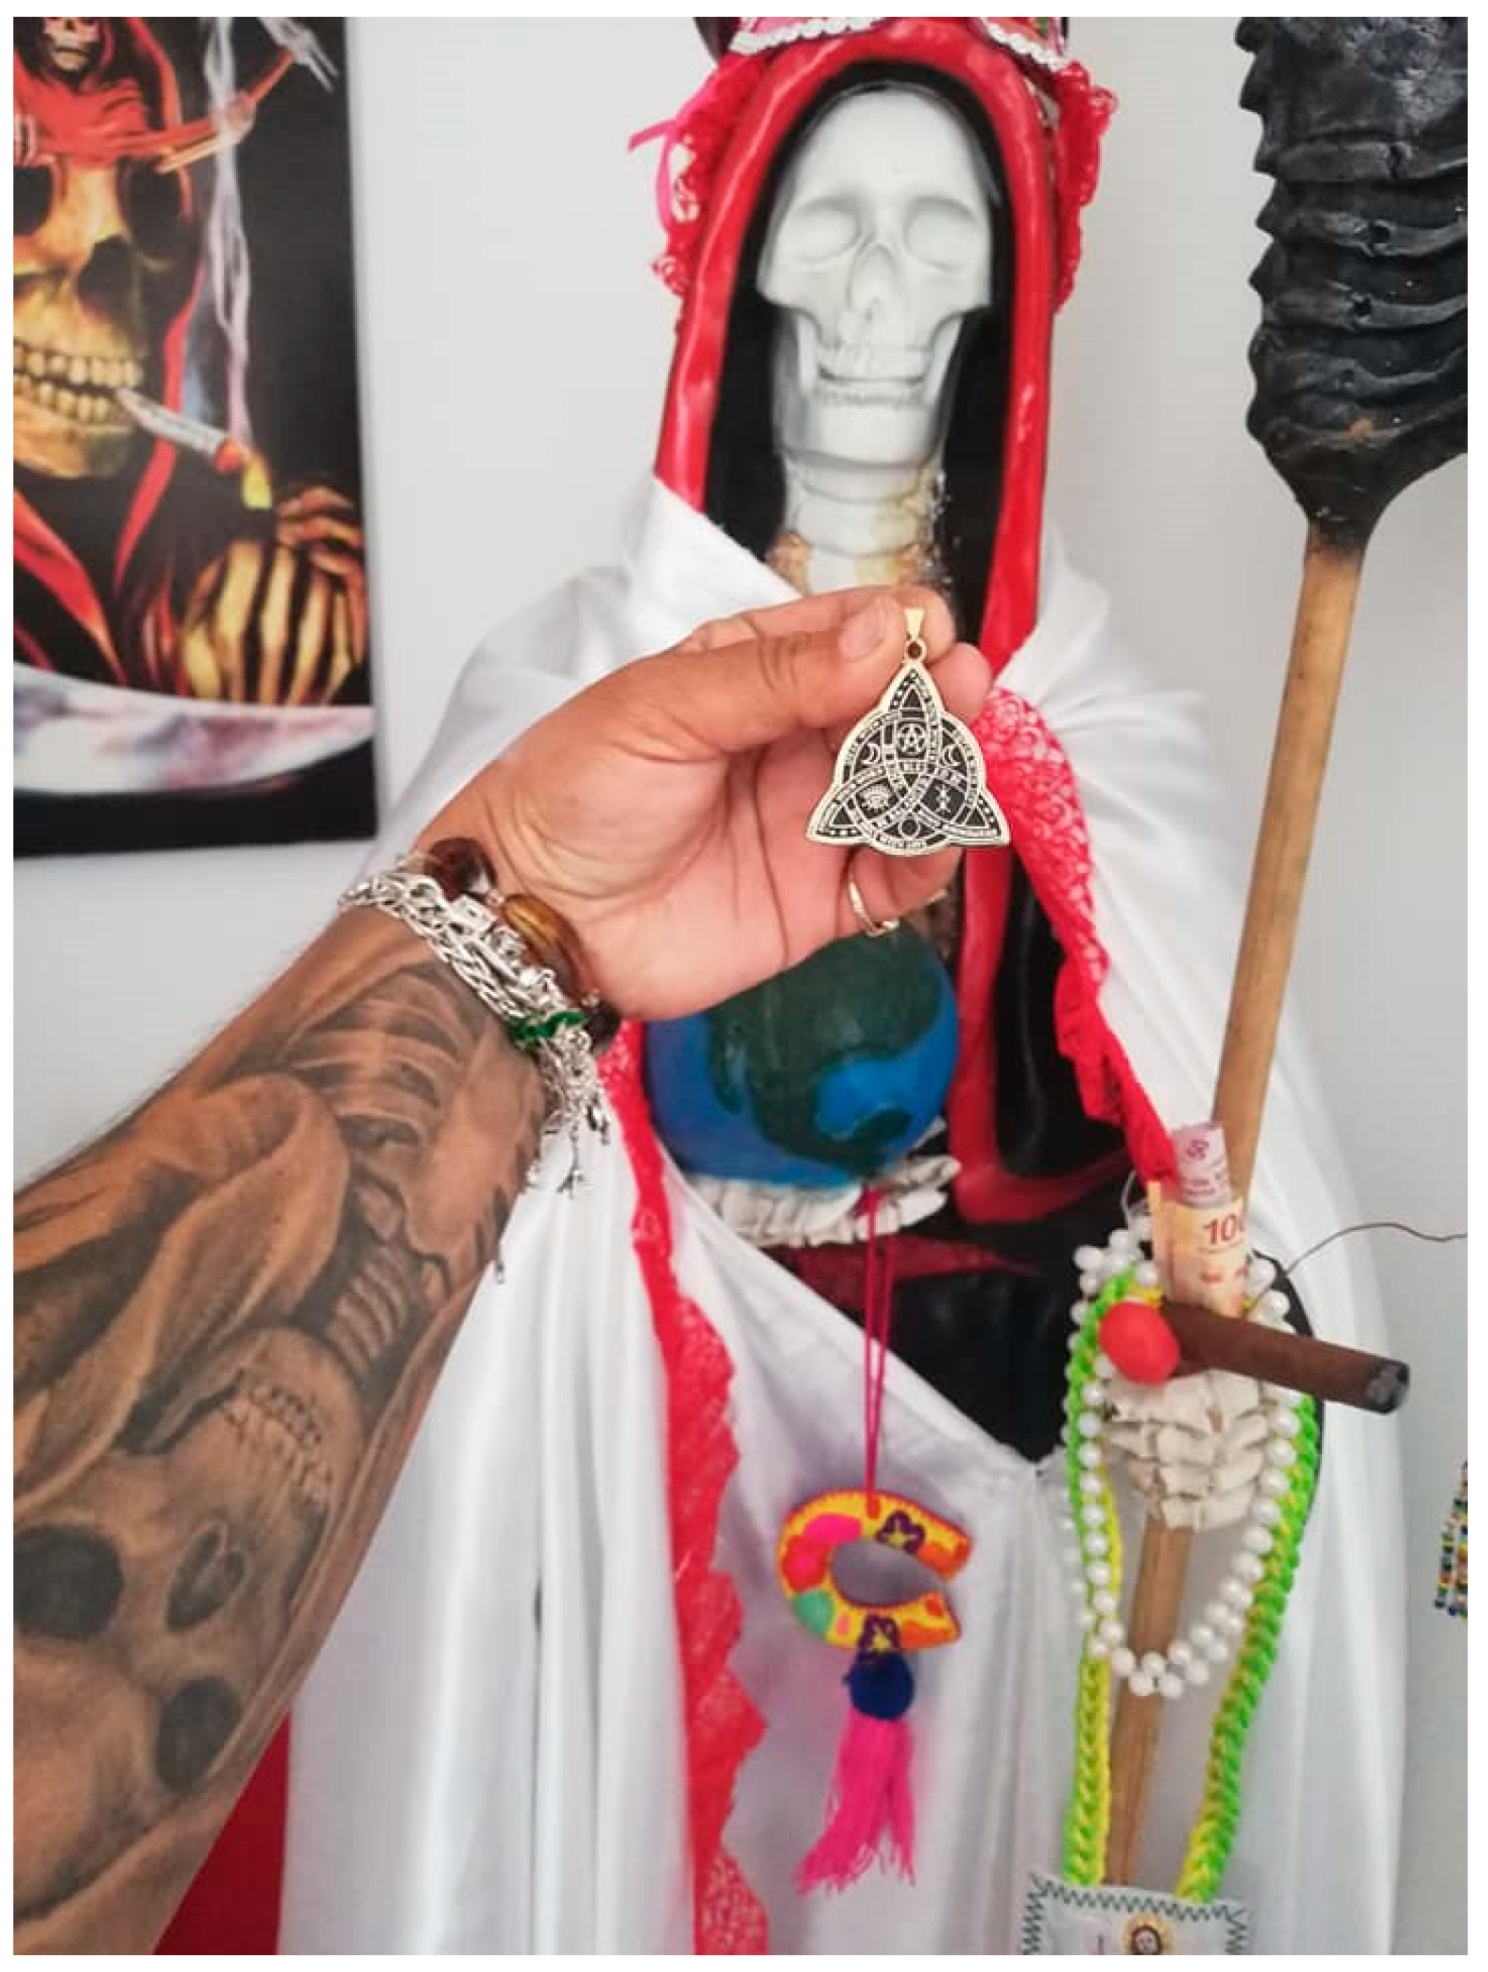 The Mysterious Religious Cults of Voodoo and Santeria - 7th Sense Stories